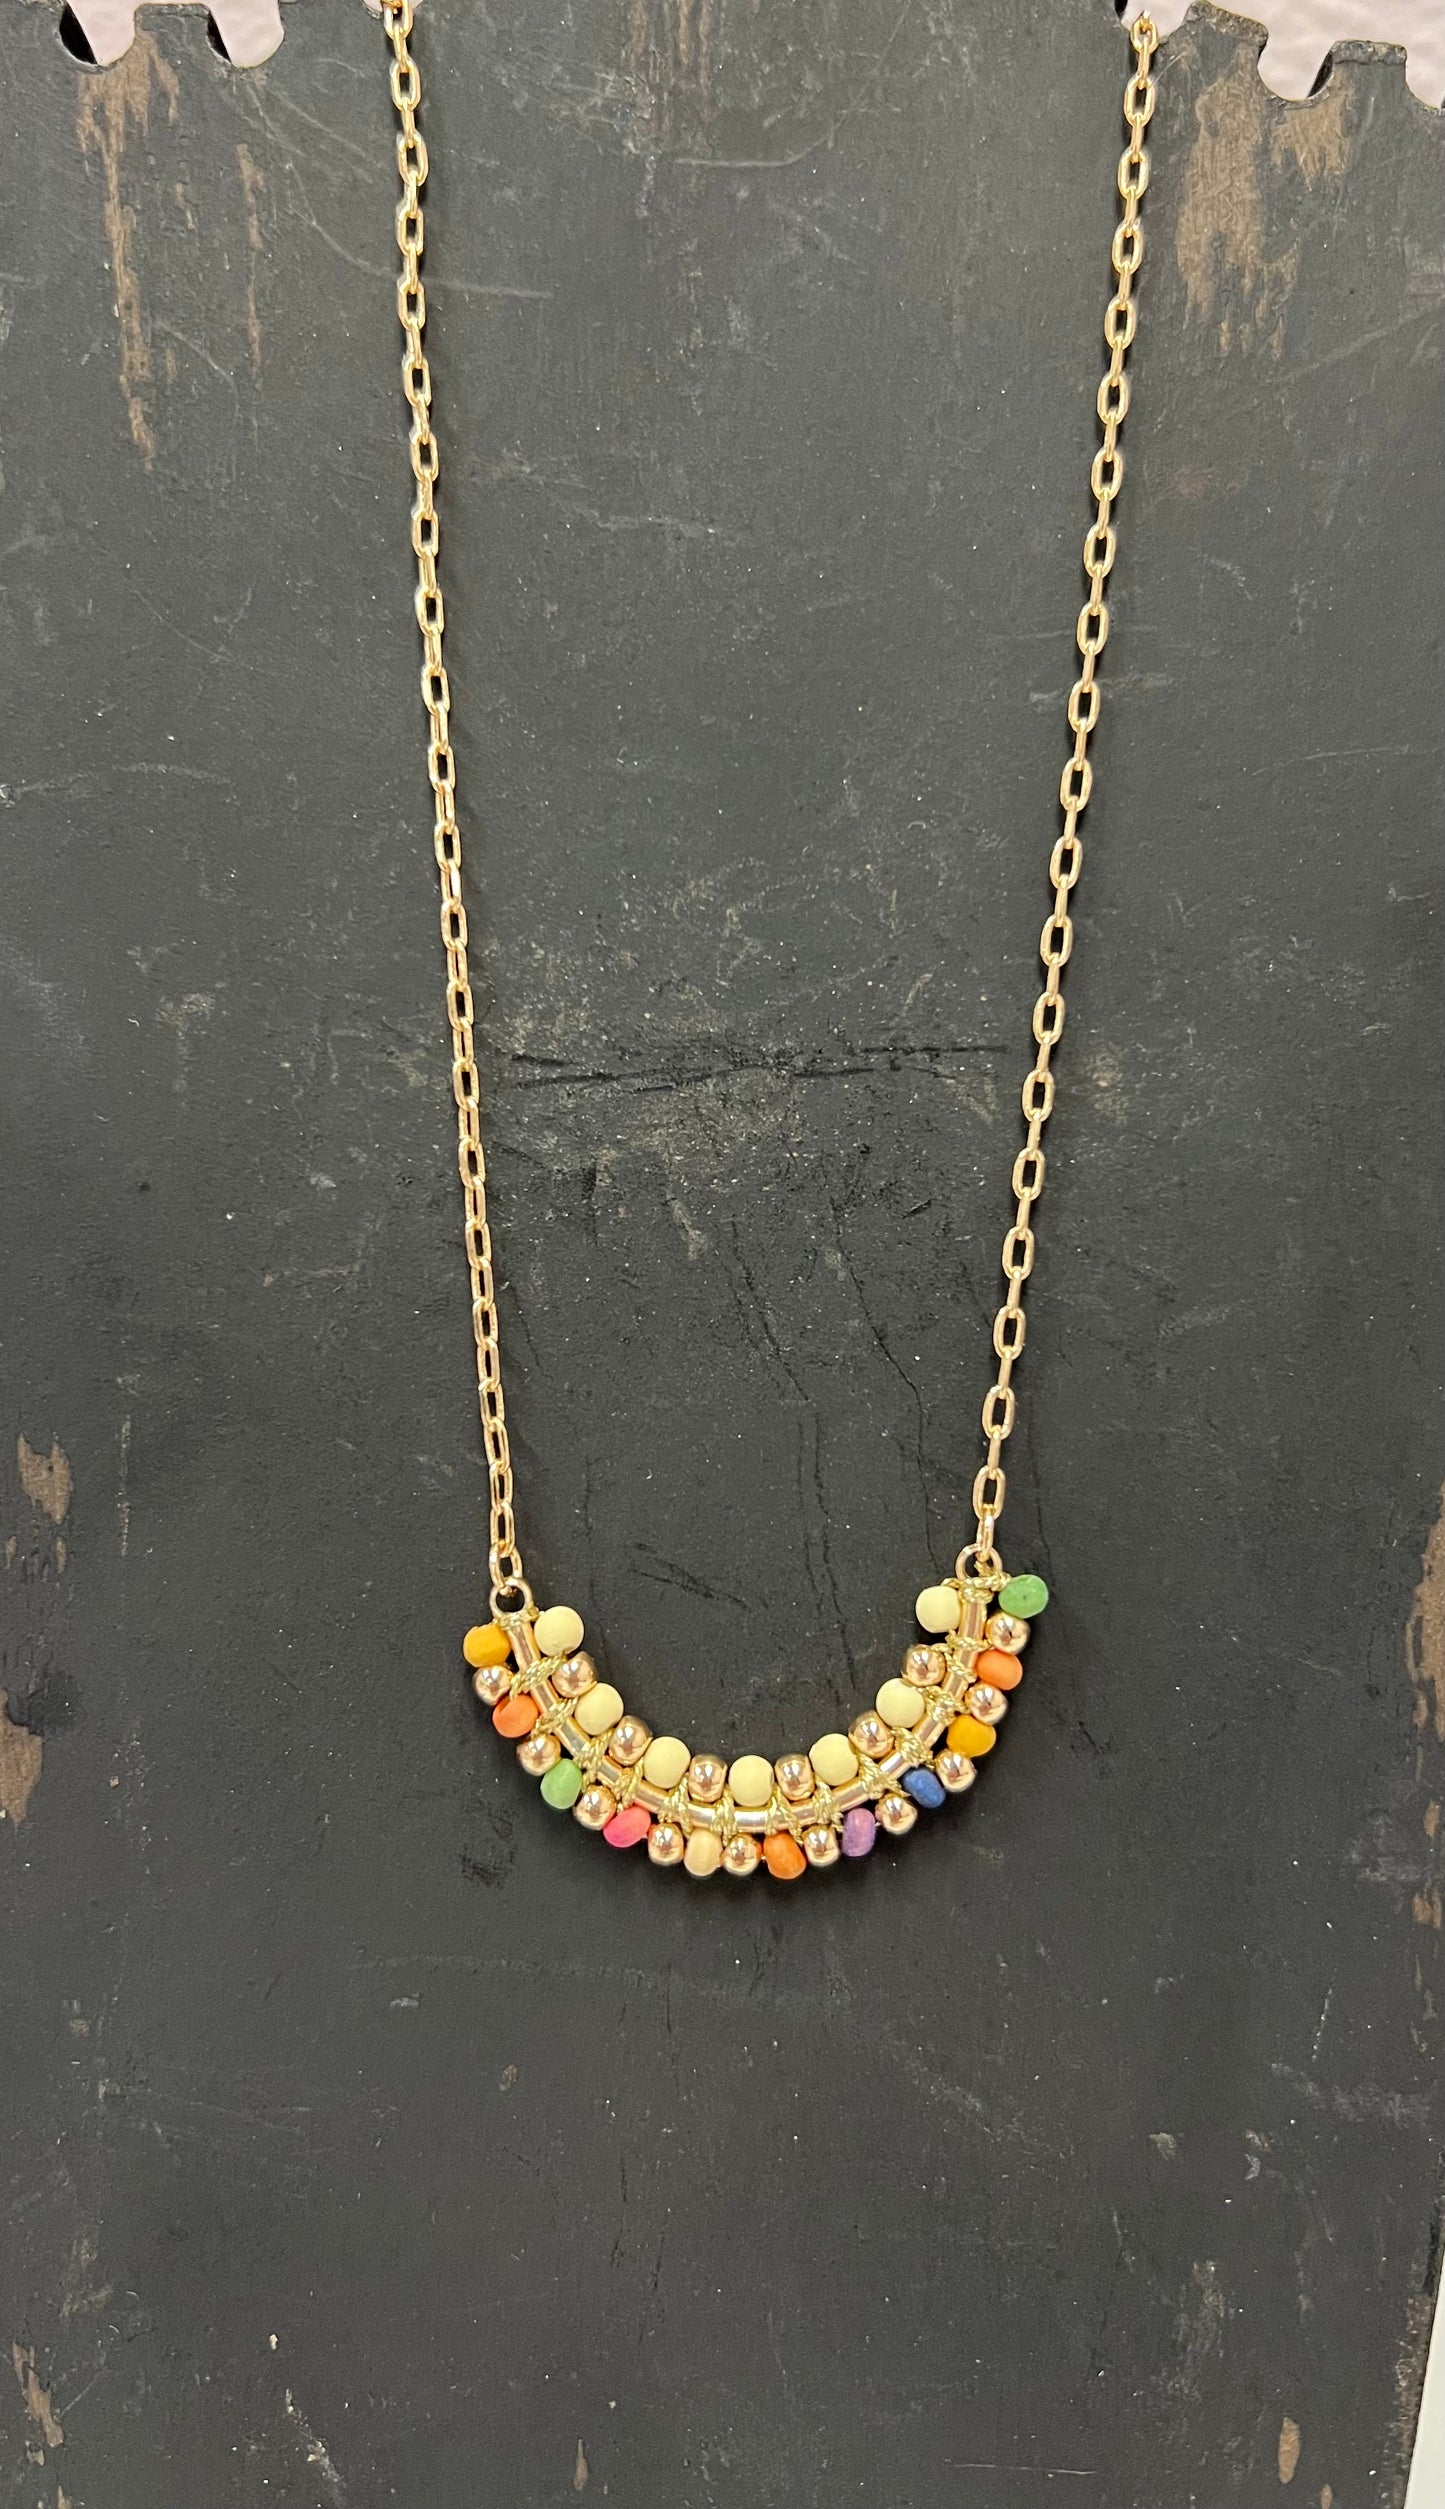 Multicolored Wood Bead Necklace